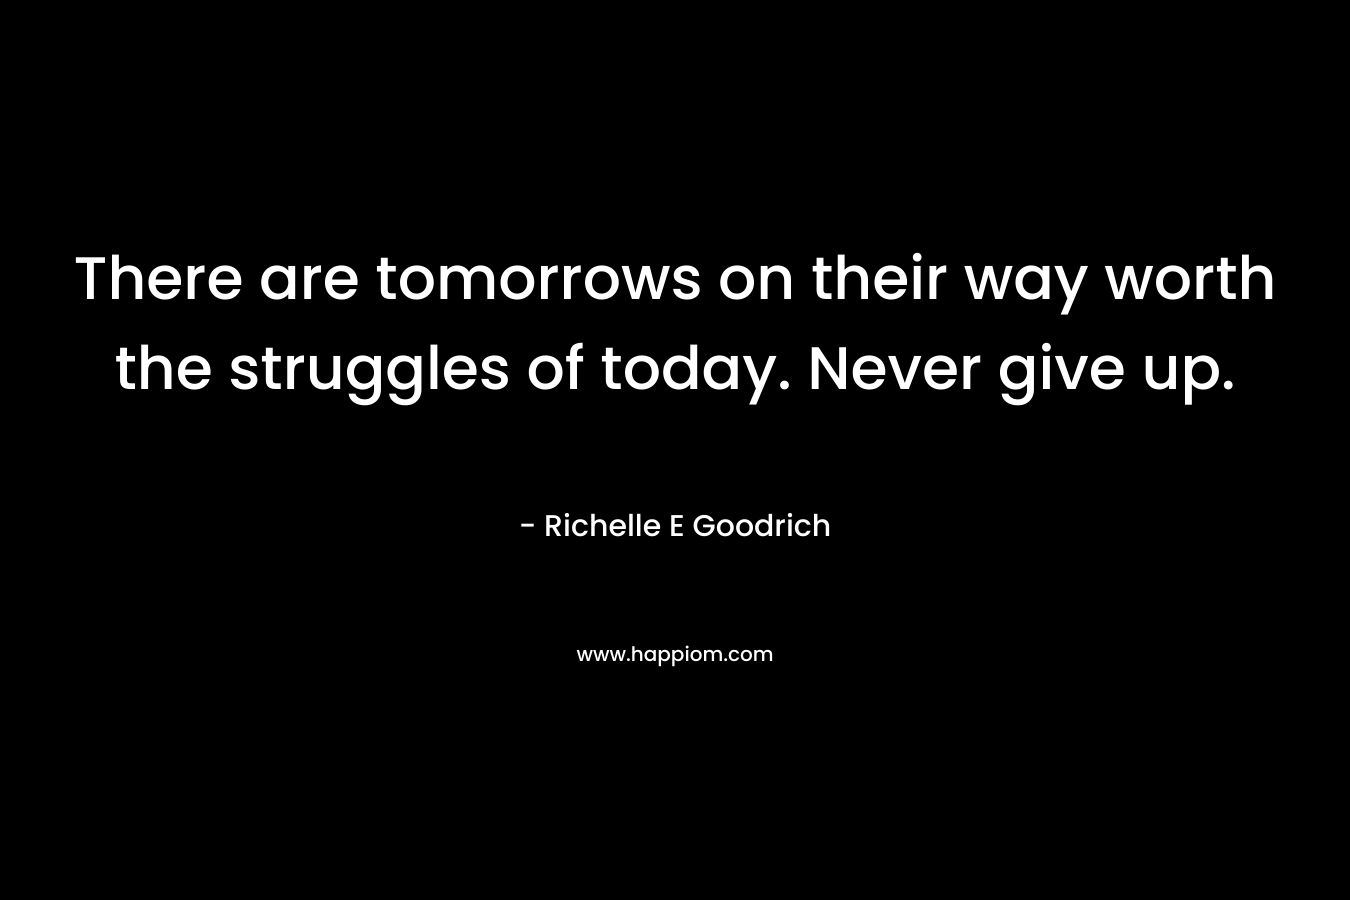 There are tomorrows on their way worth the struggles of today. Never give up. – Richelle E Goodrich